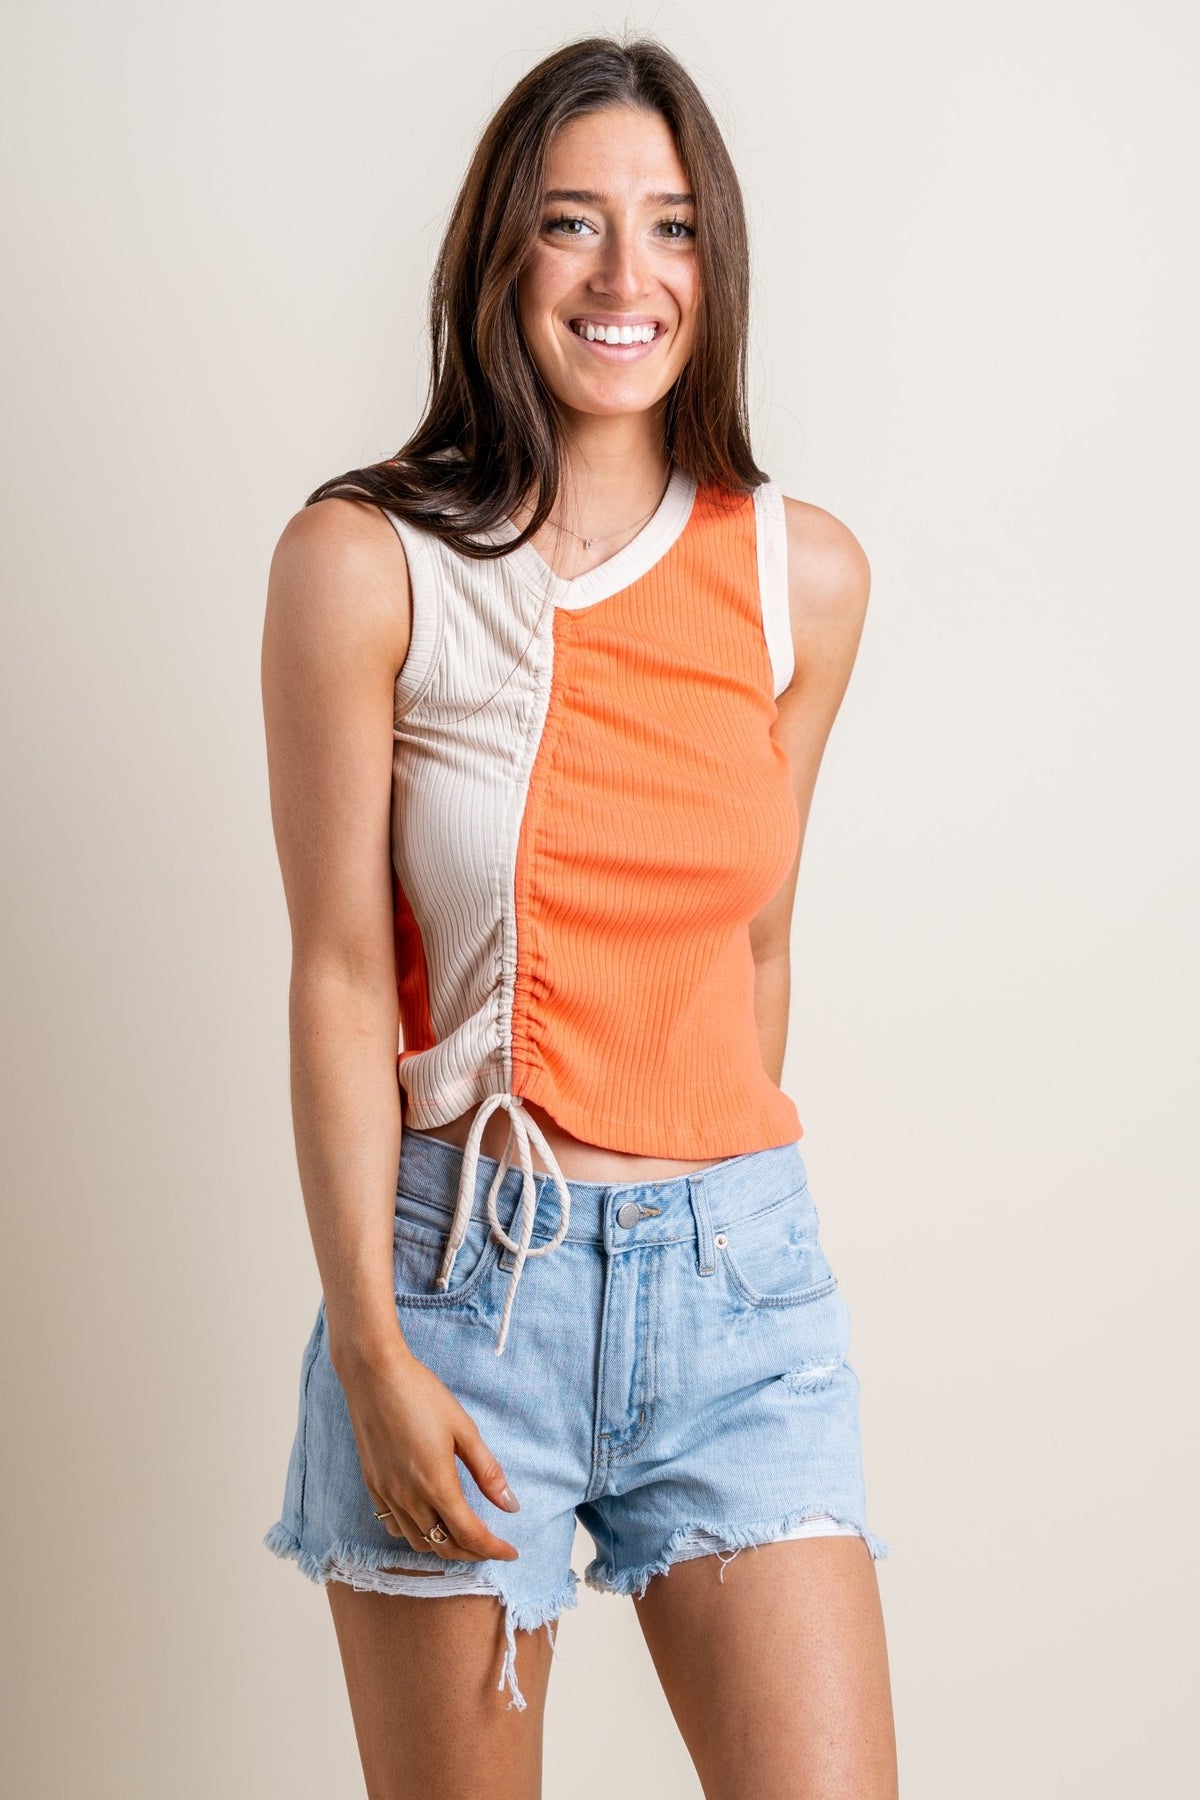 DayDreamer ruched colorblock tank top peach echo - DayDreamer Graphic Band Tees at Lush Fashion Lounge Trendy Boutique in Oklahoma City